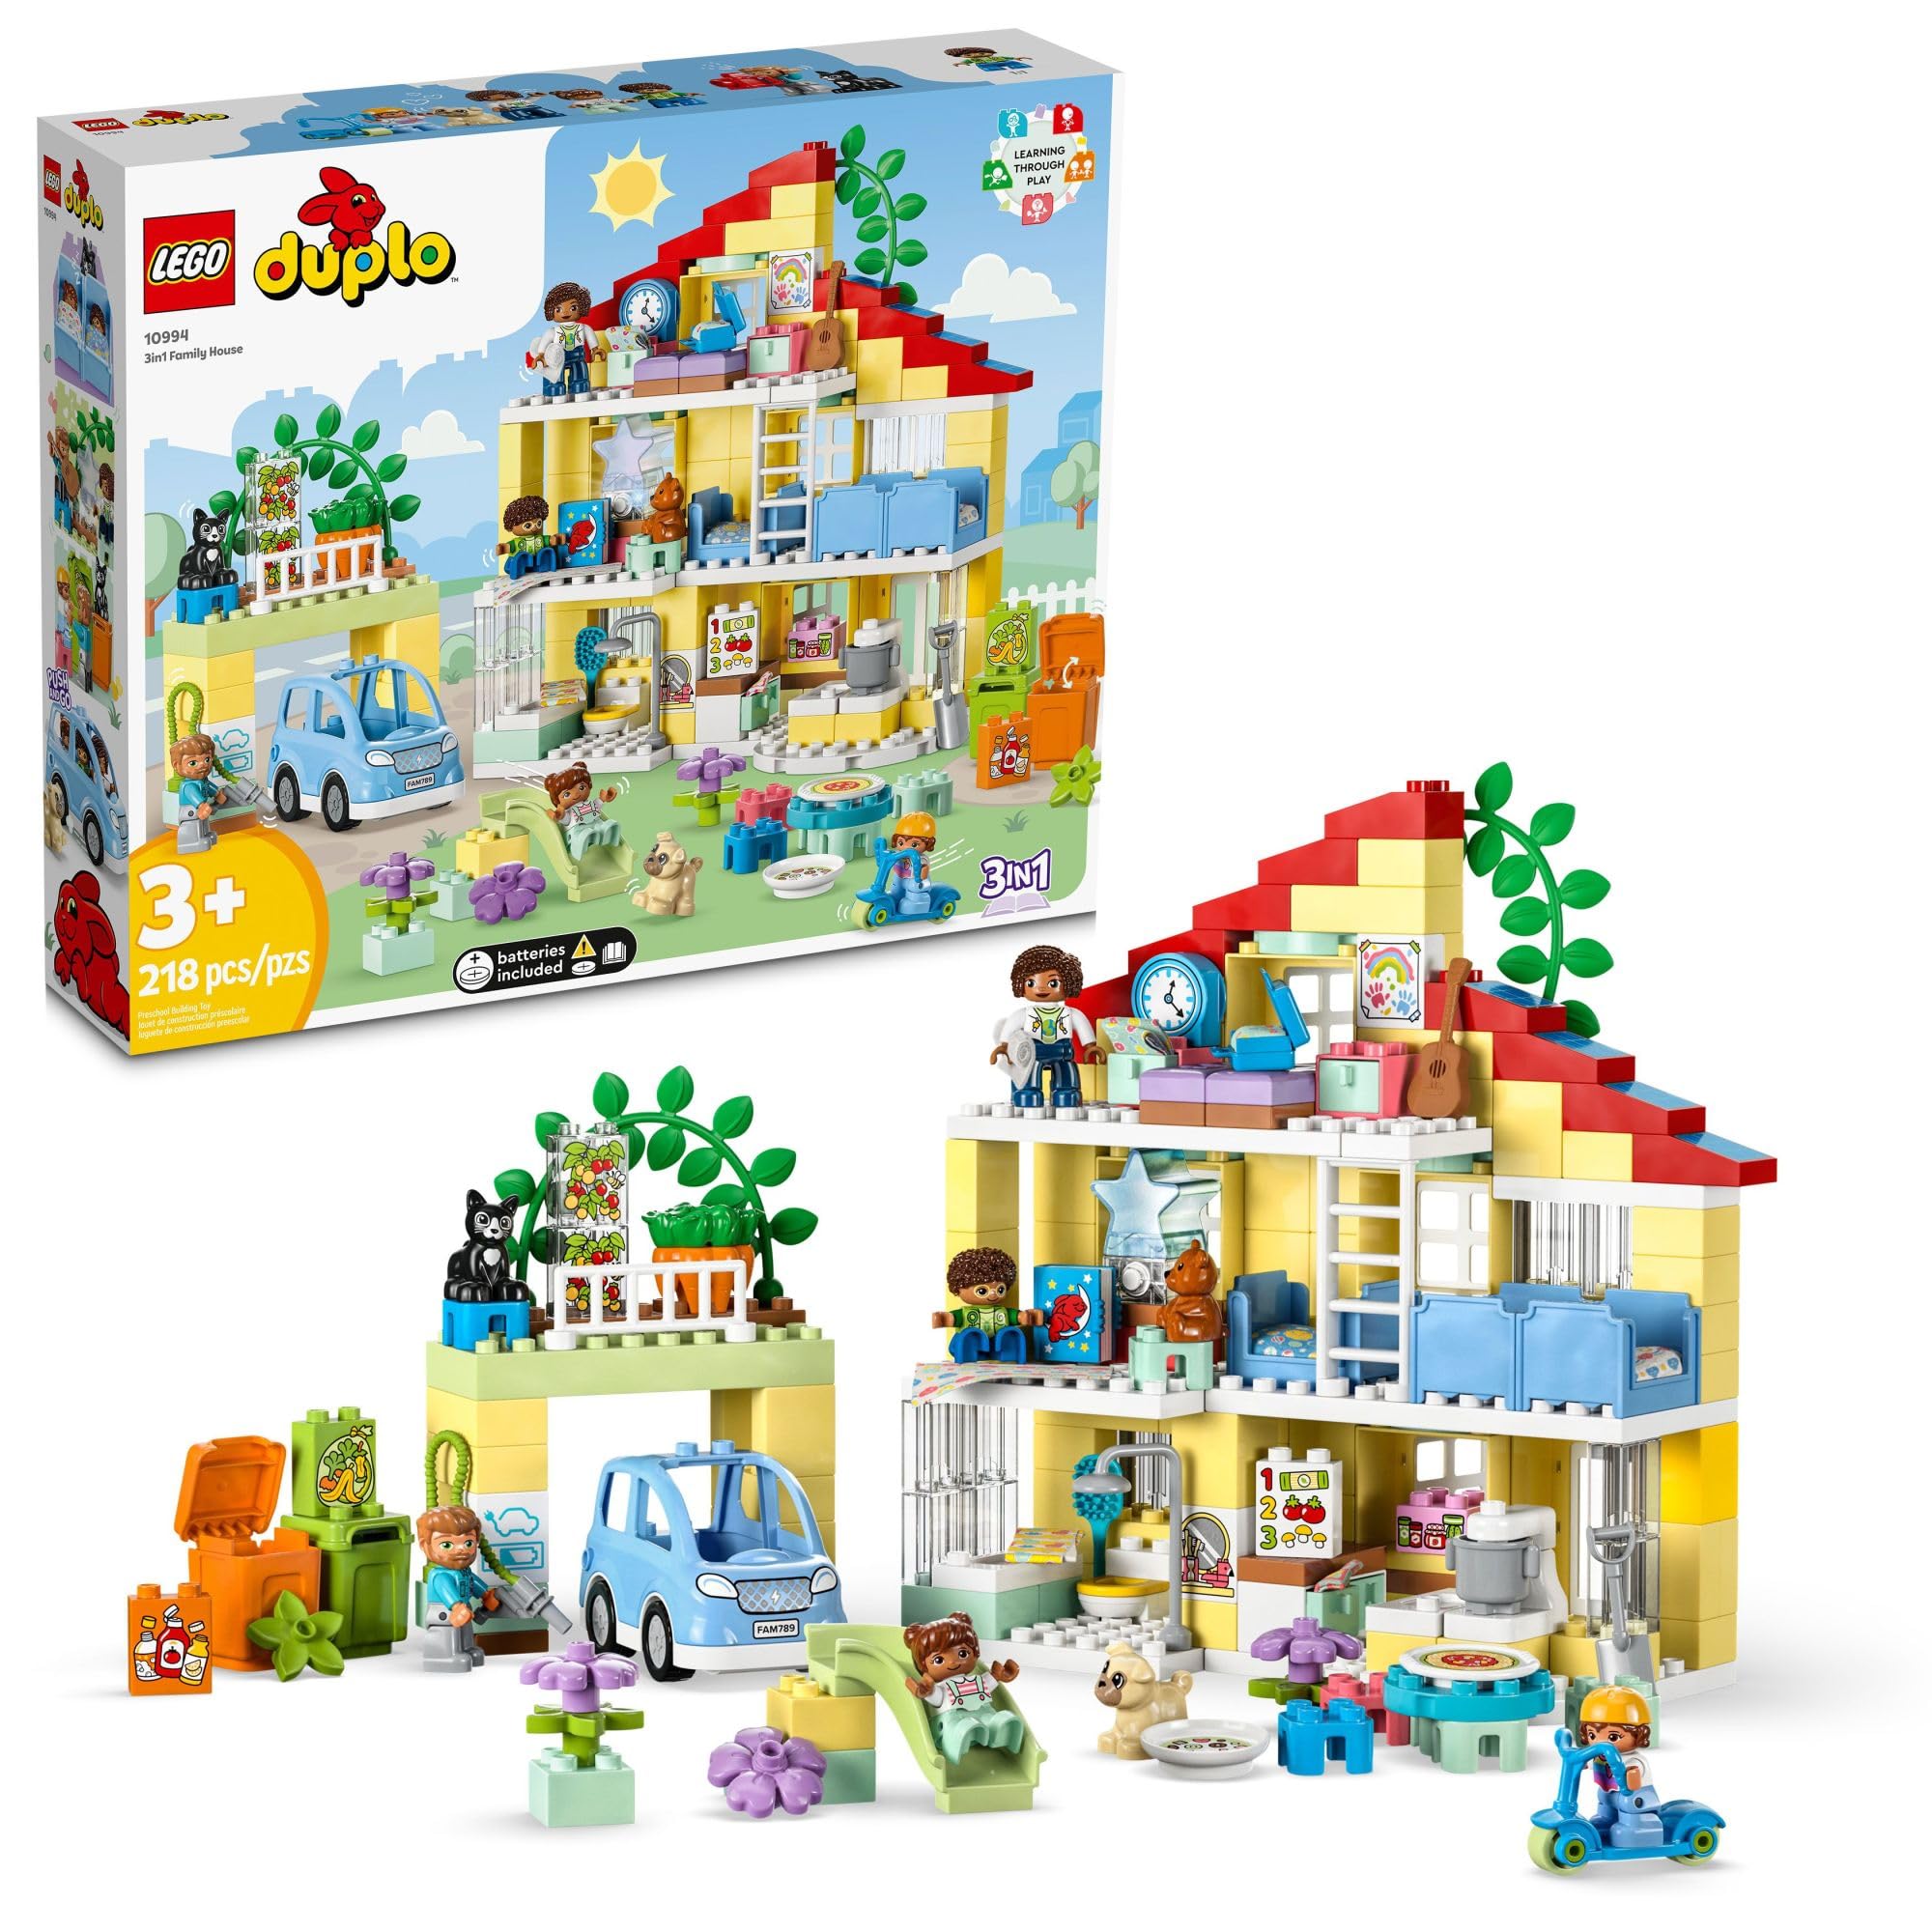 LEGO DUPLO Town 3in1 Family House 10994 Educational STEM Building Toy Set for Toddlers Ages 3+, Car Toy and 3 Floor House Lets The Whole Family Build, Play and Learn